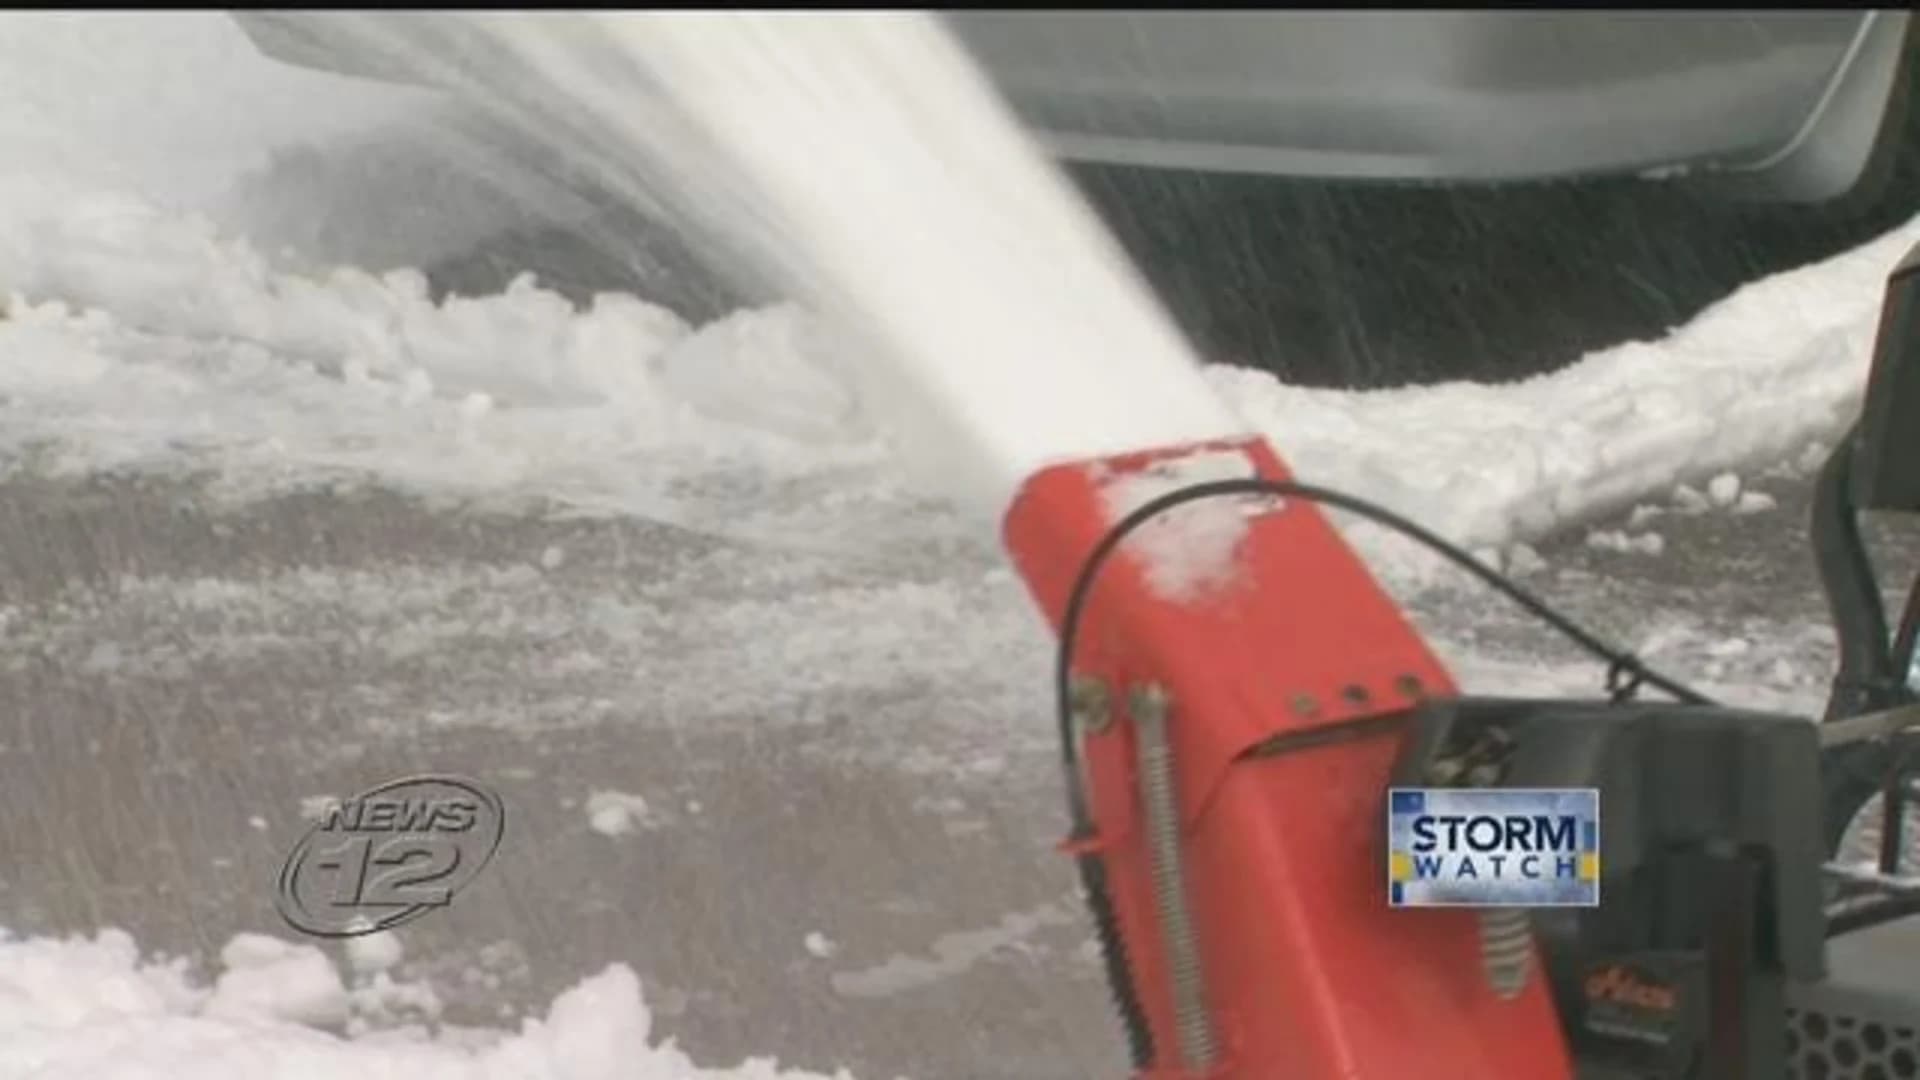 Crews work to clear snowfall ahead of next winter storm